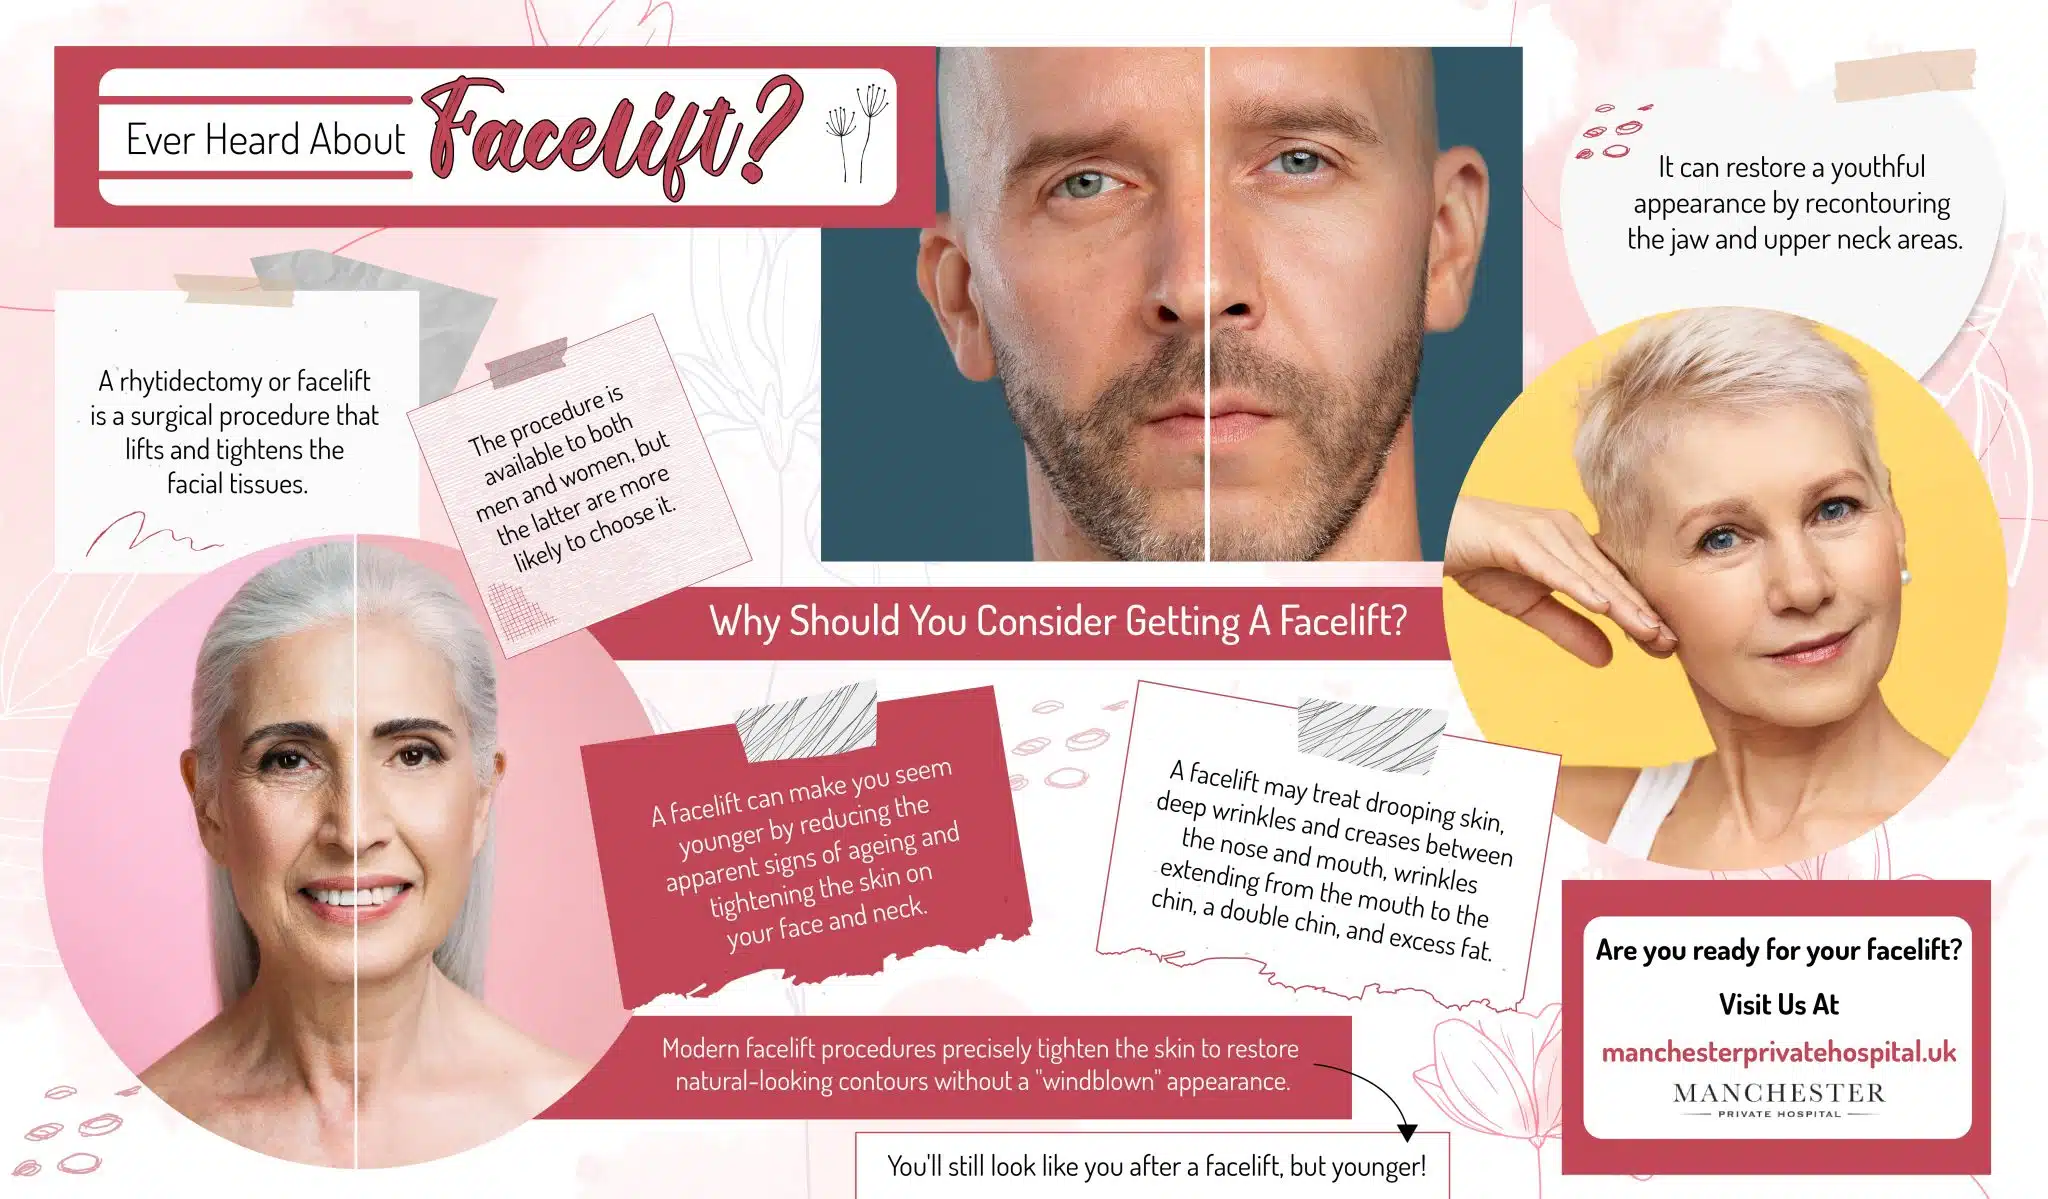 Ever Heard About Facelift?